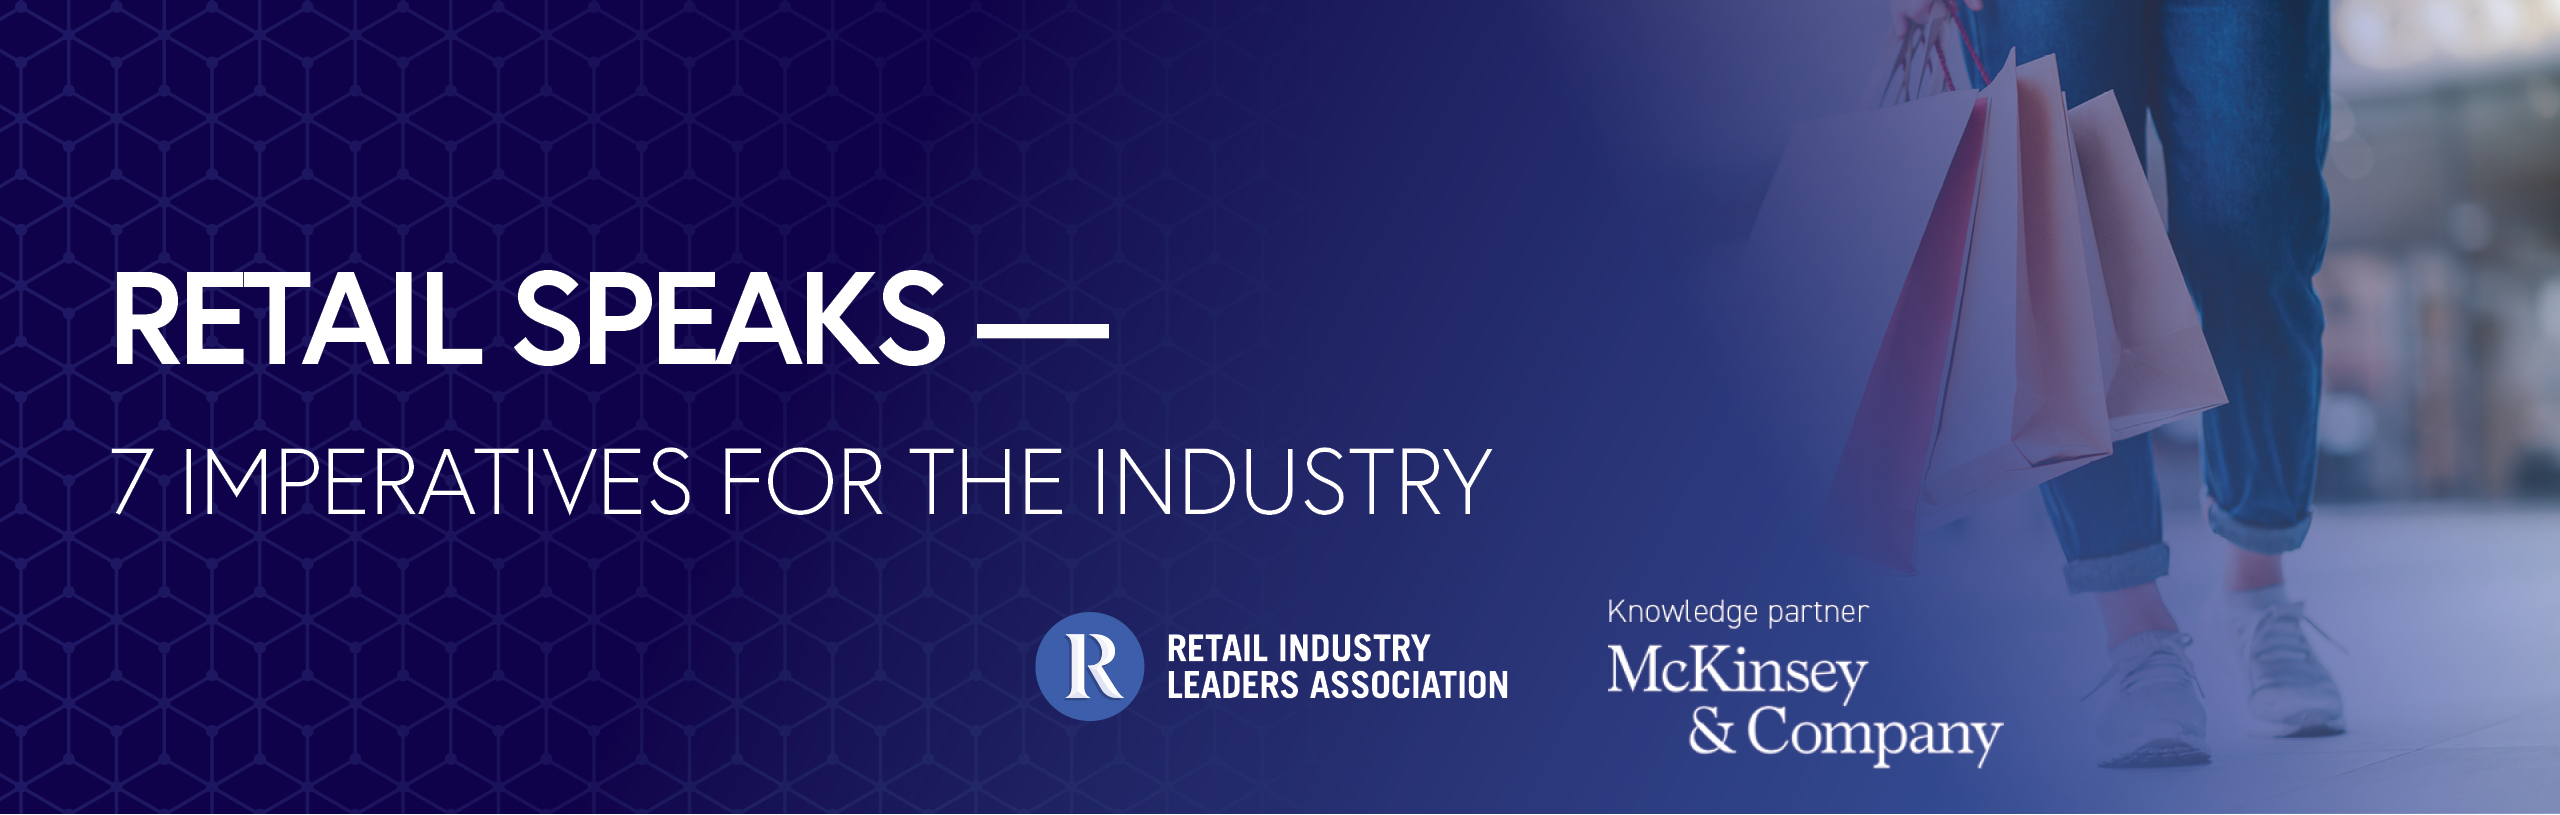 Retail Speaks: Seven imperatives for the industry. 2021 Retail Industry Outlook. Innovative retail trends to watch that will change the future of retail.